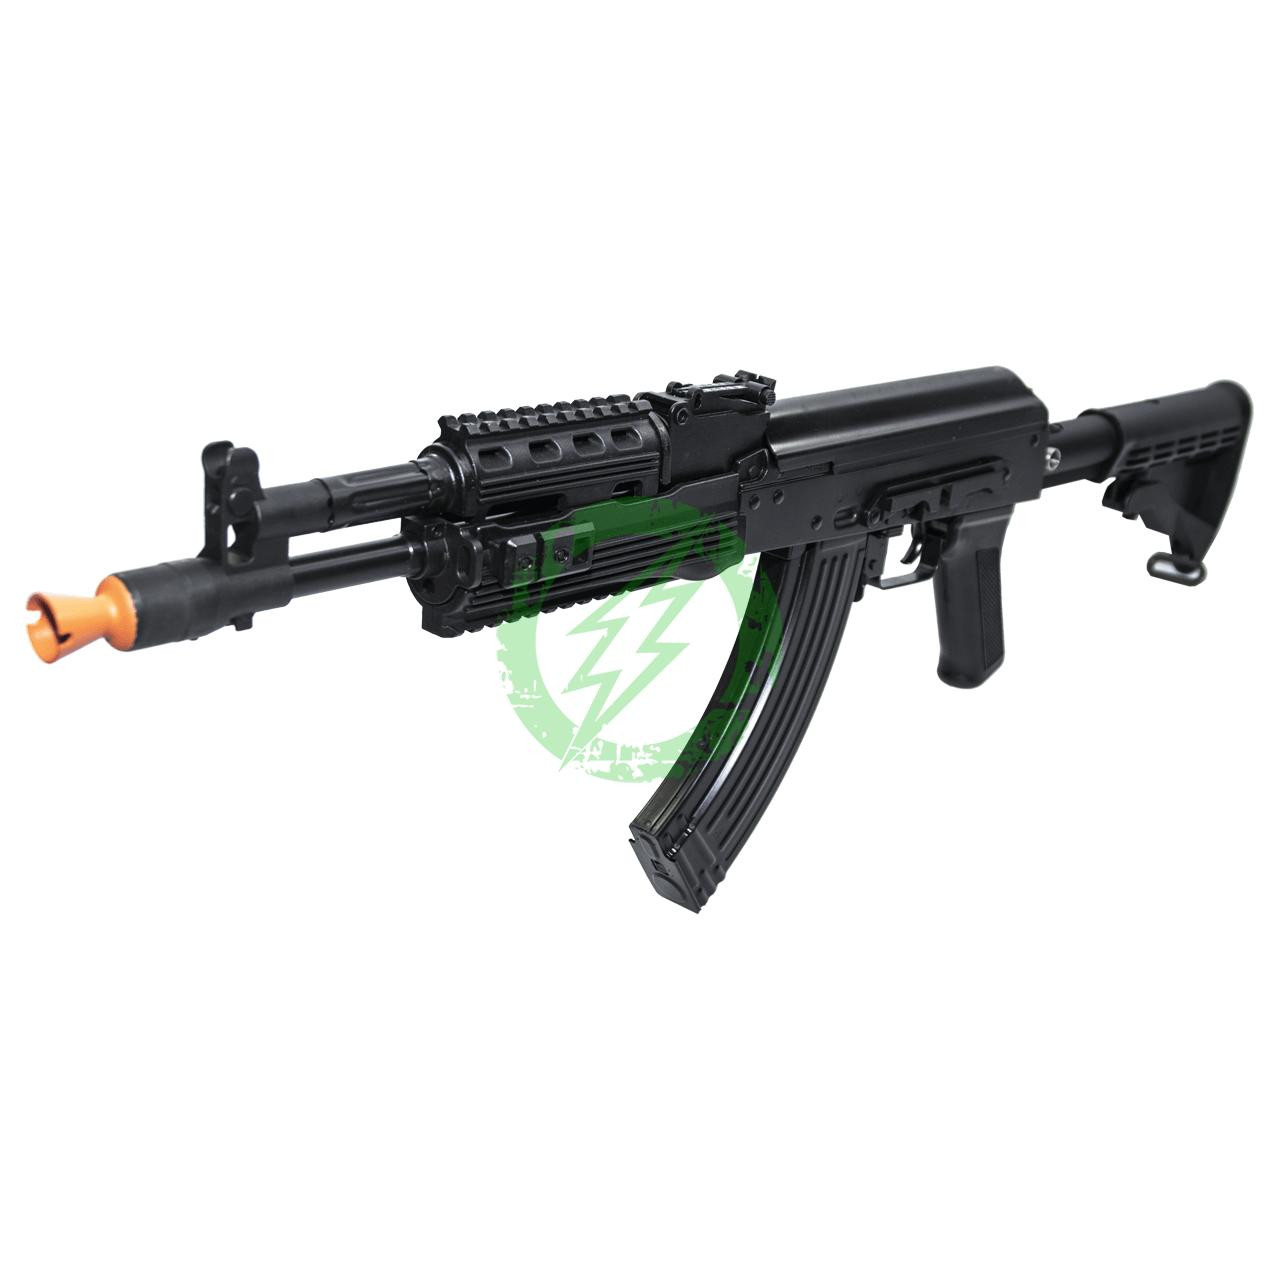  LCT TK104 AEG with Collapsible Stock (Black) 